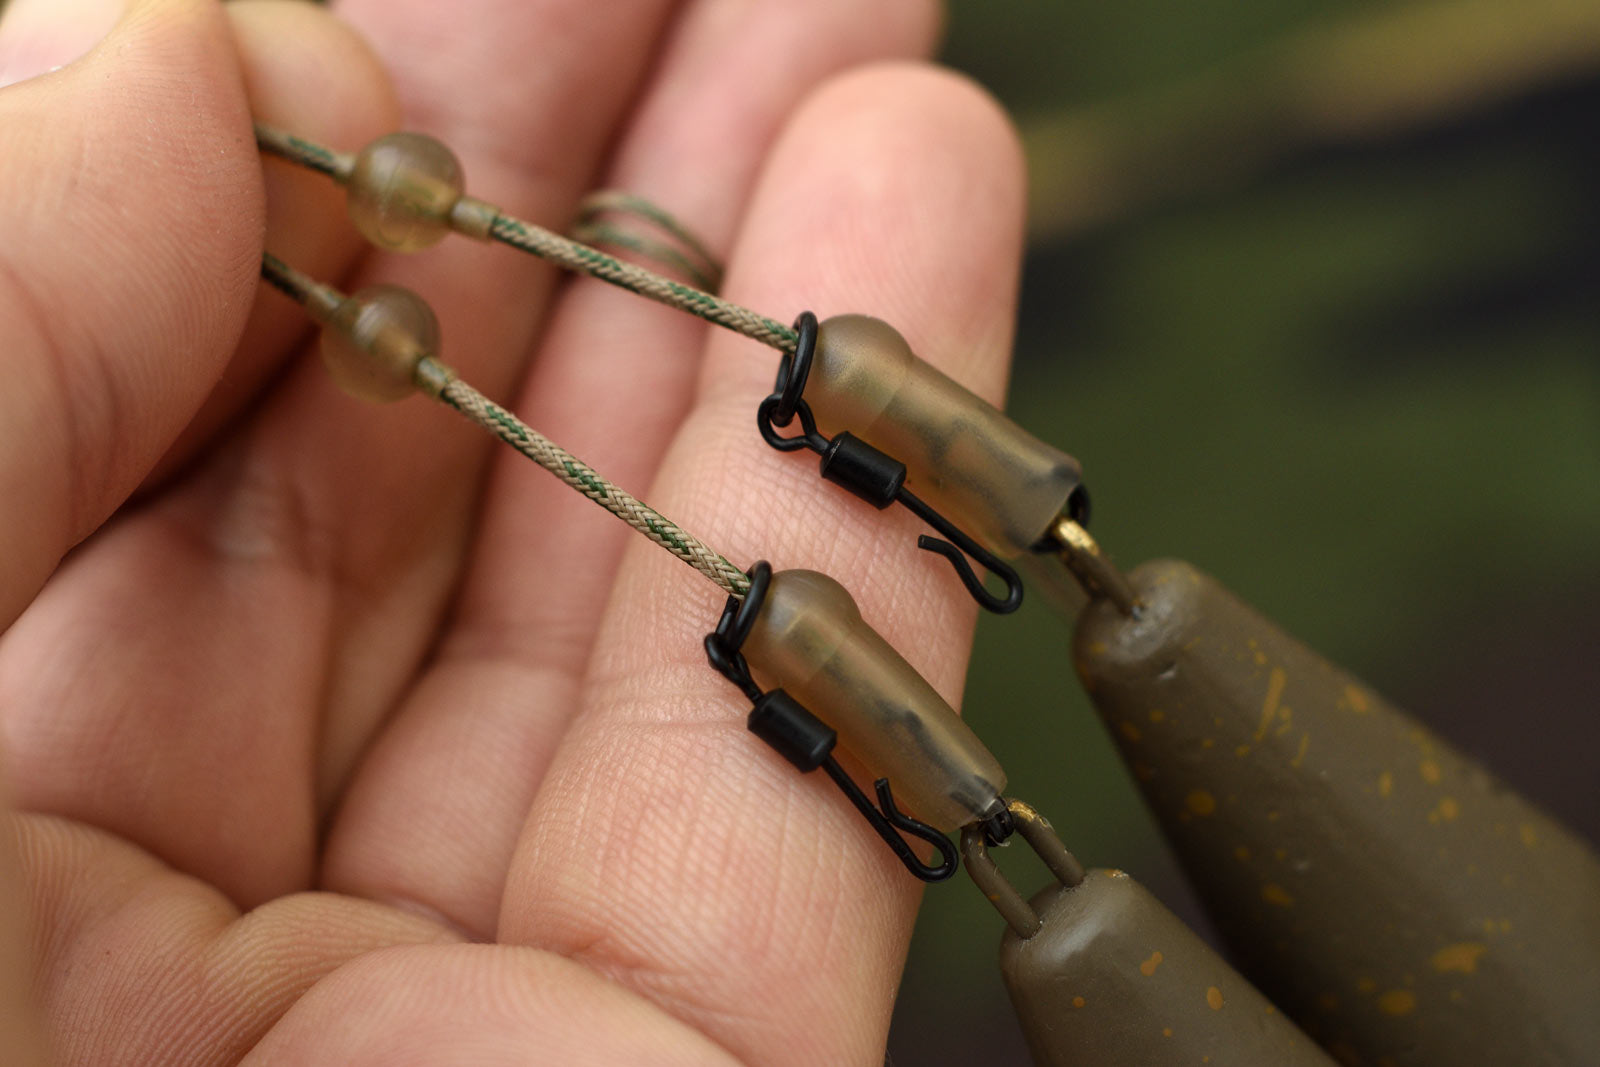 How To Tie A EASIEST Carp Fishing Rig - Carp Fishing with CHEAP MATERIALS 